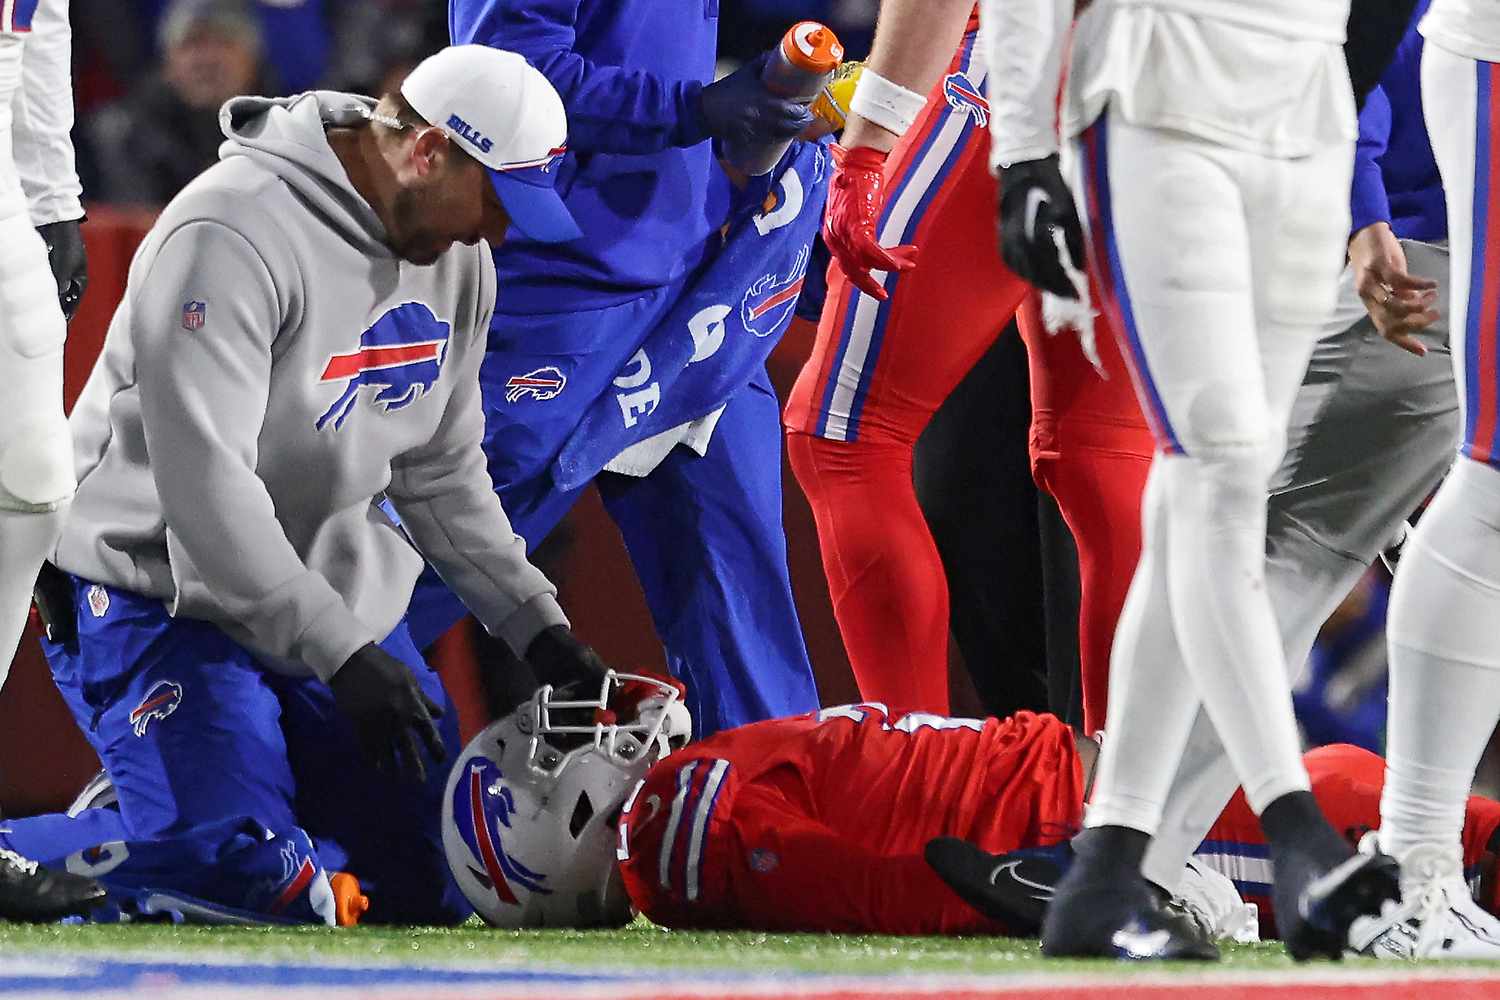 The Buffalo Bills' key player will miss the rest of the season due to.....